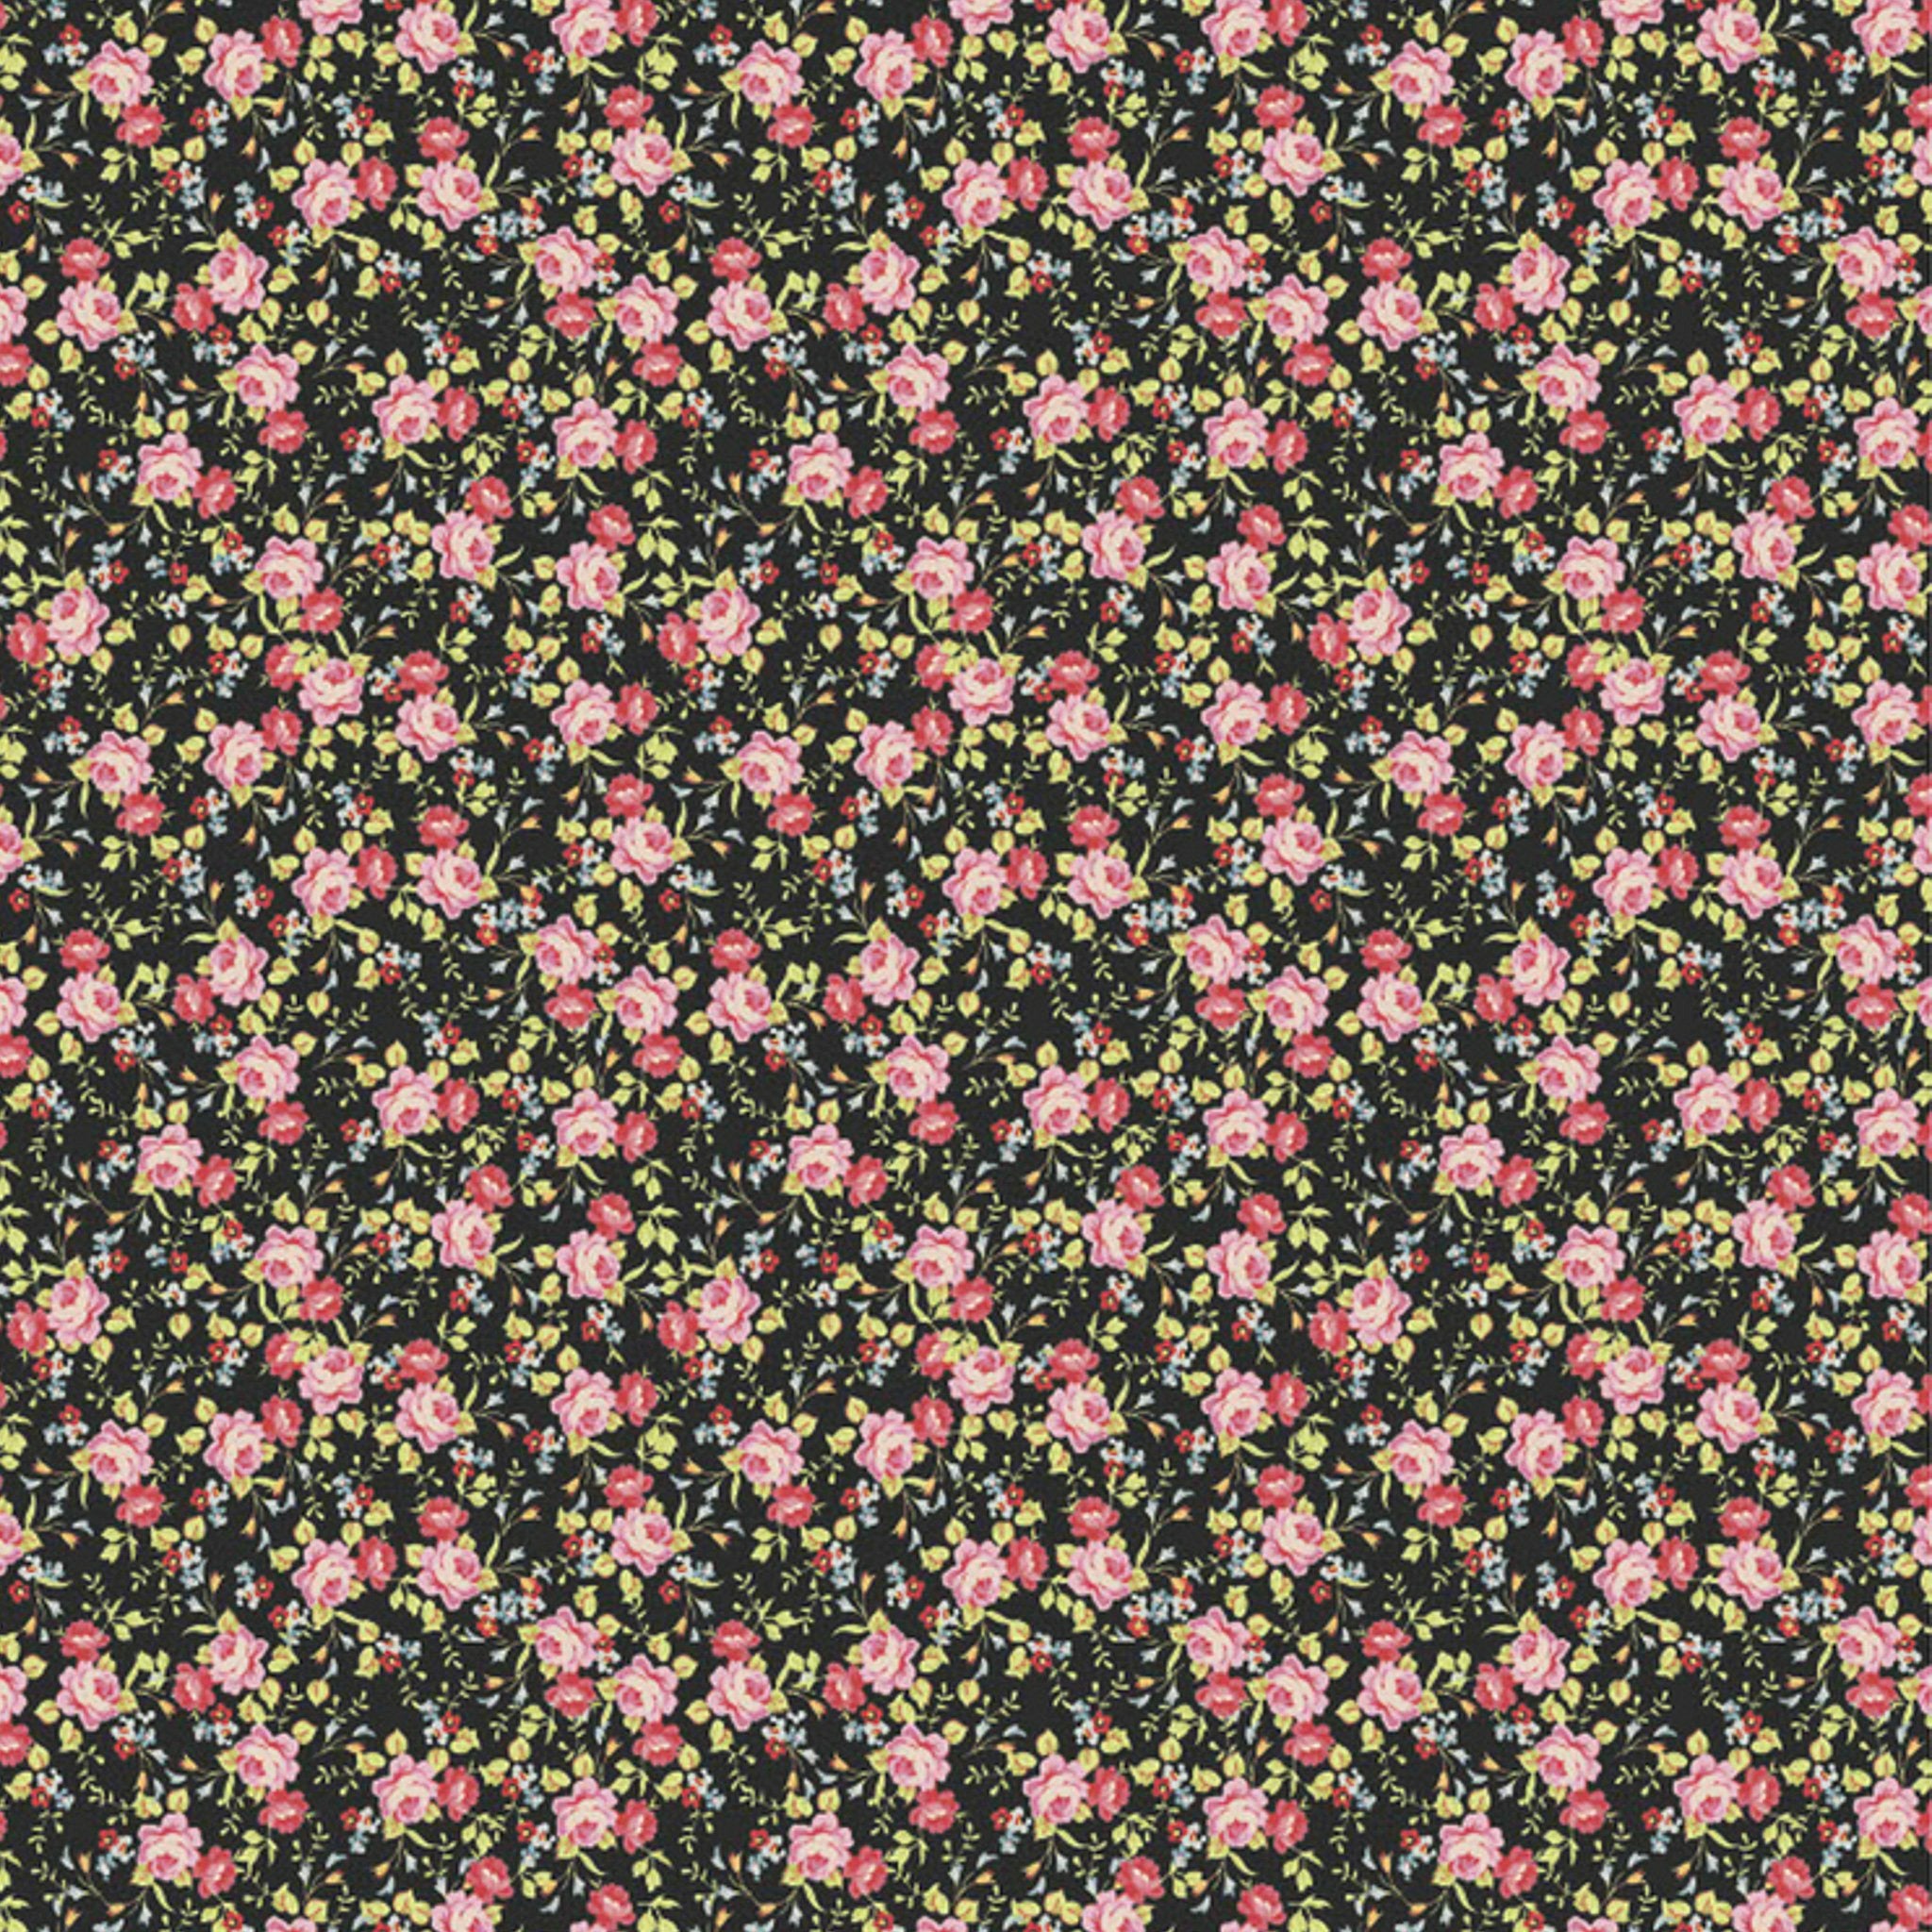 Close-up of an A1 rice paper design that features small pink peony flowers and yellow-green leaves against a dark background.